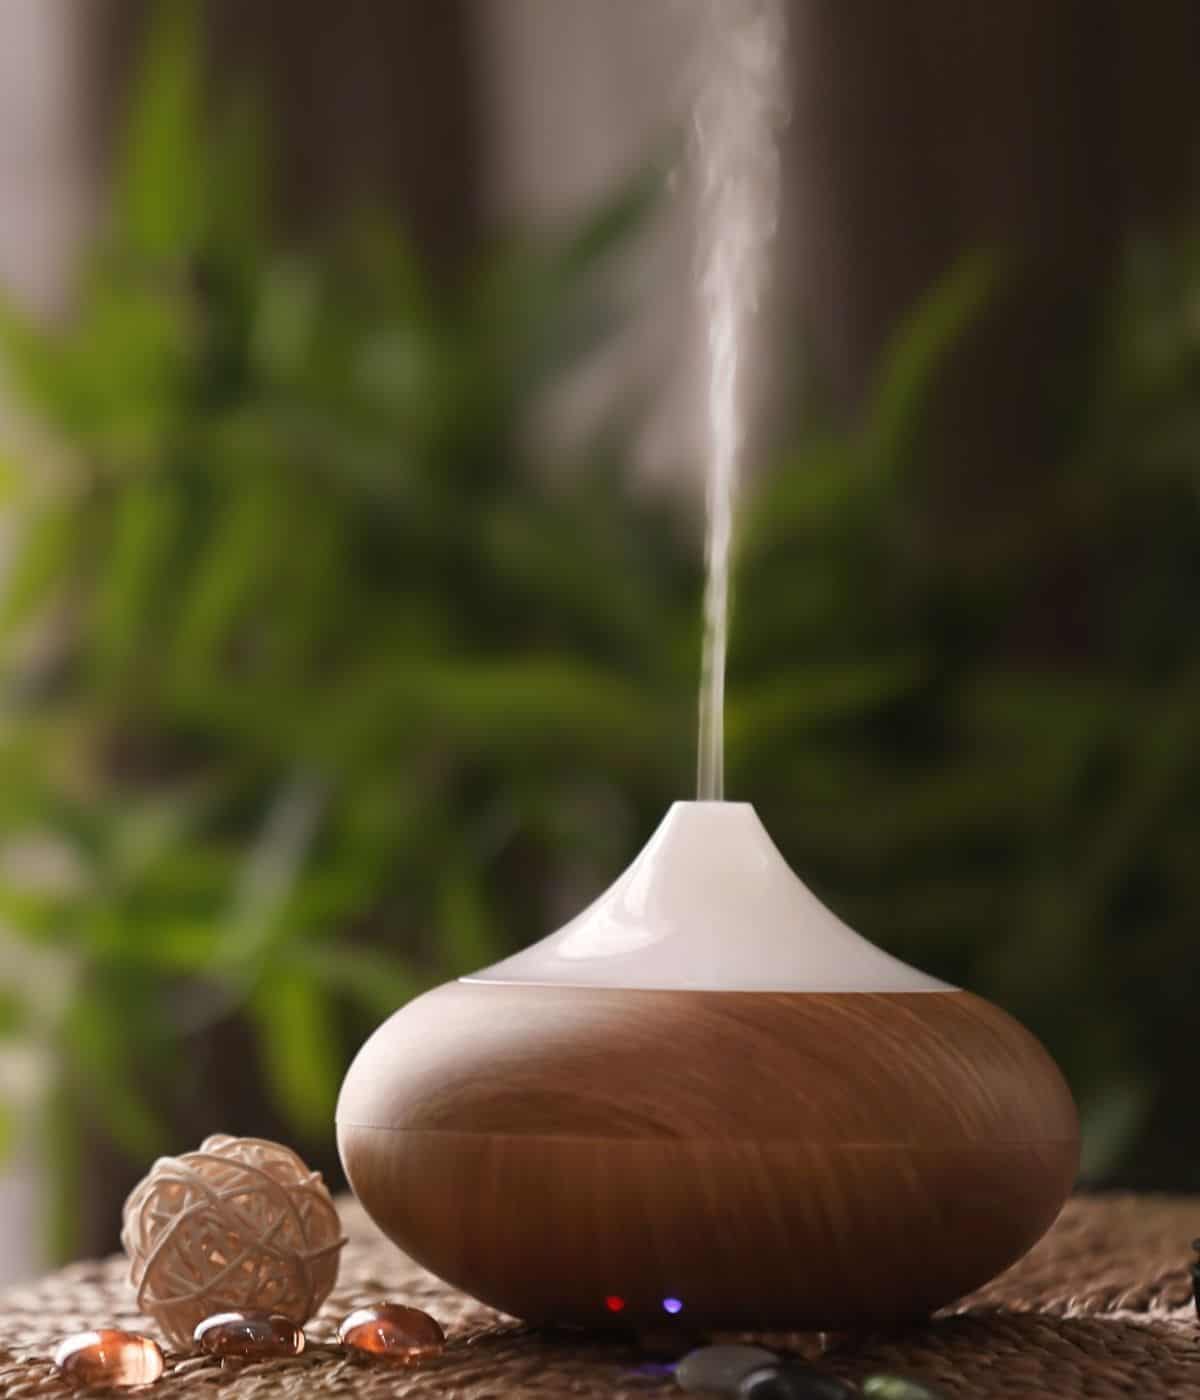 Diffuser on table spewing mist.